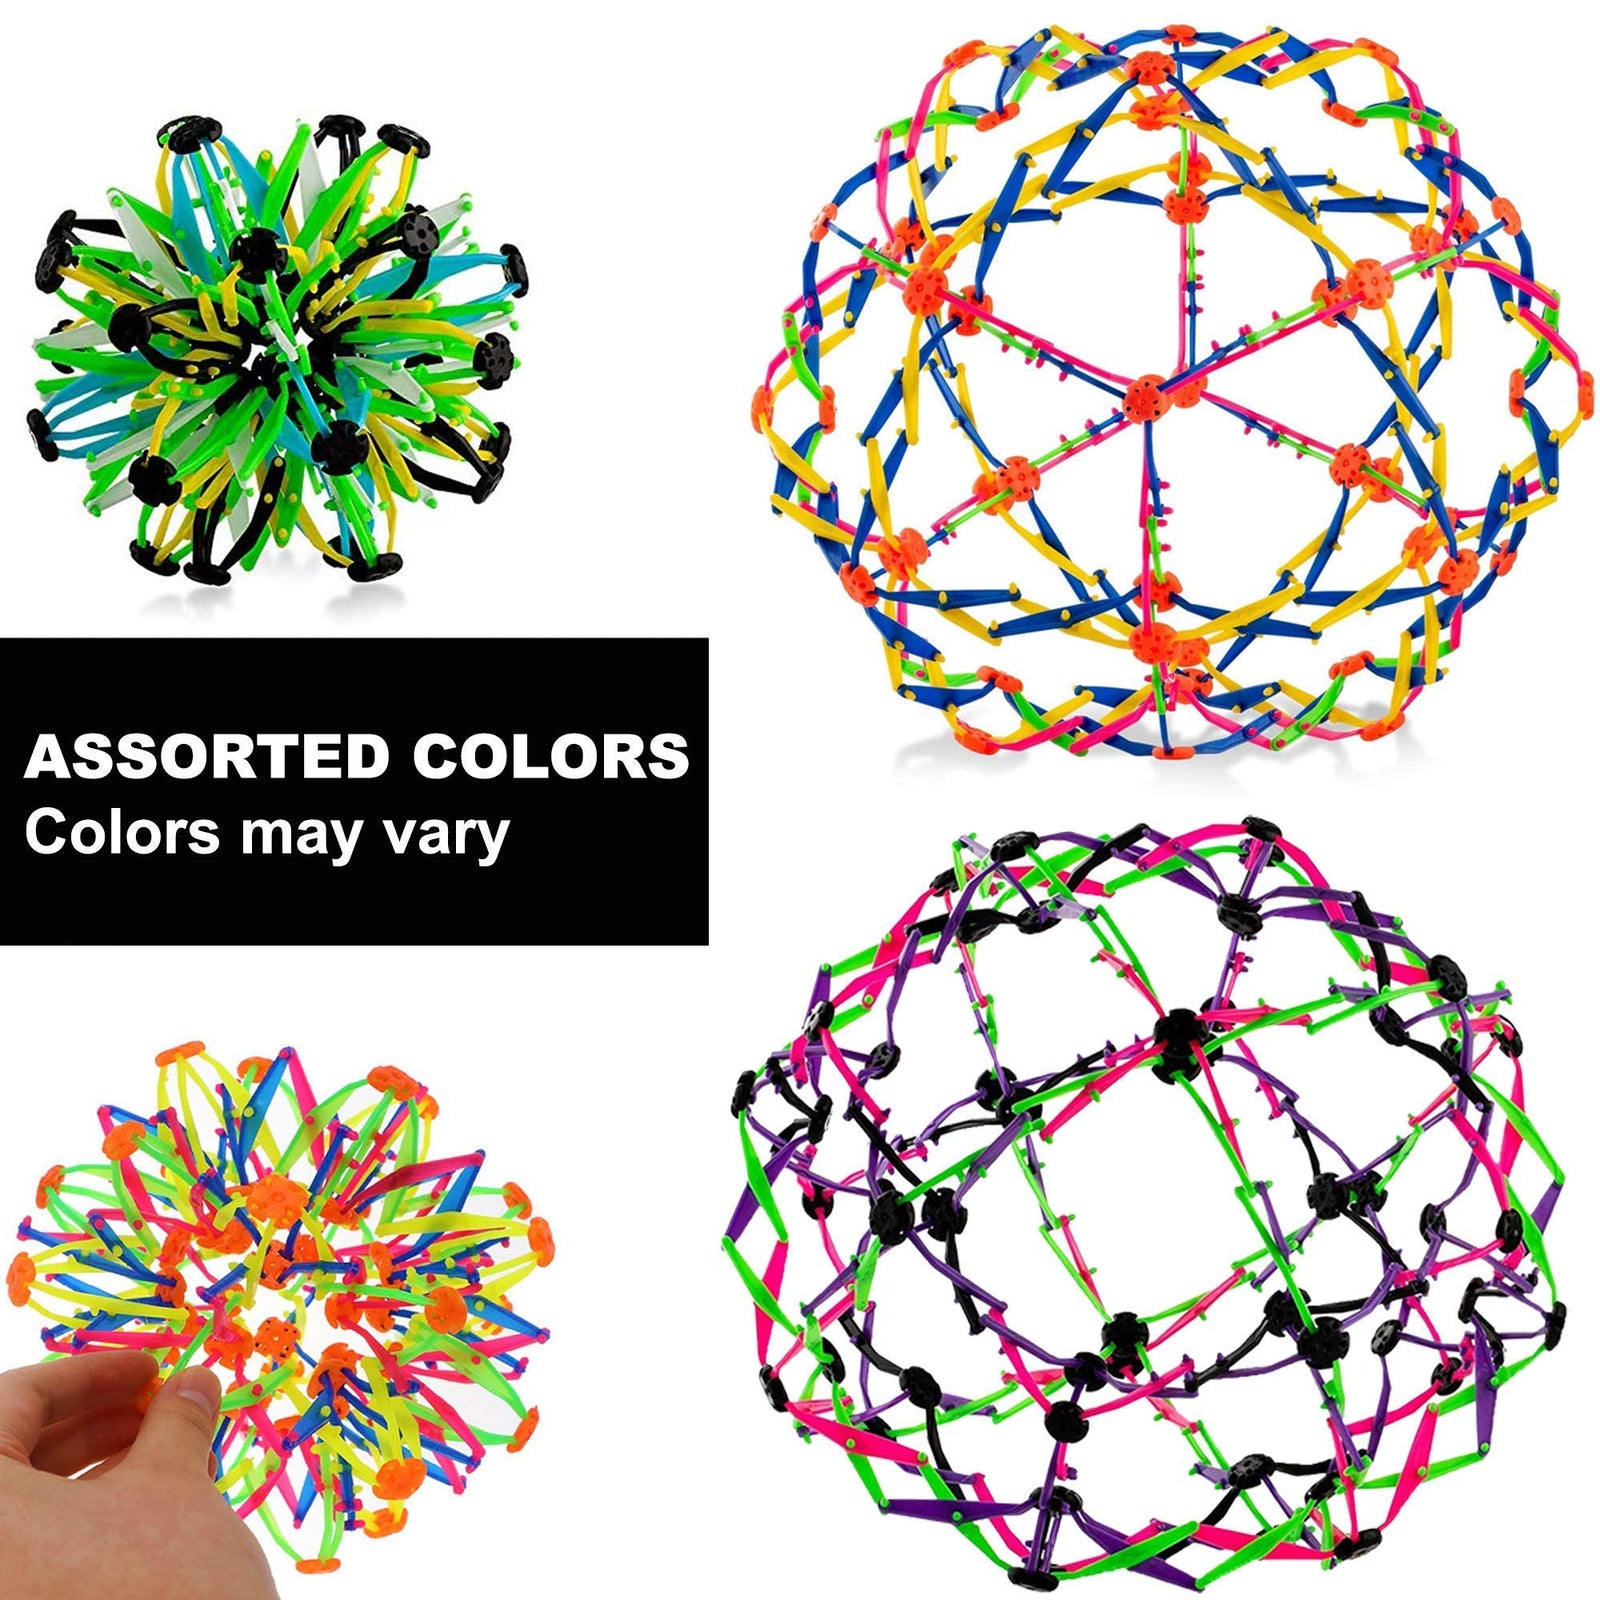 4E's Novelty Expandable Breathing Ball Toy Sphere for Kids Stress Reliever Fidget Toys Colors May Vary for Yoga Anxiety Relaxation Expands from 5.6" to 12"